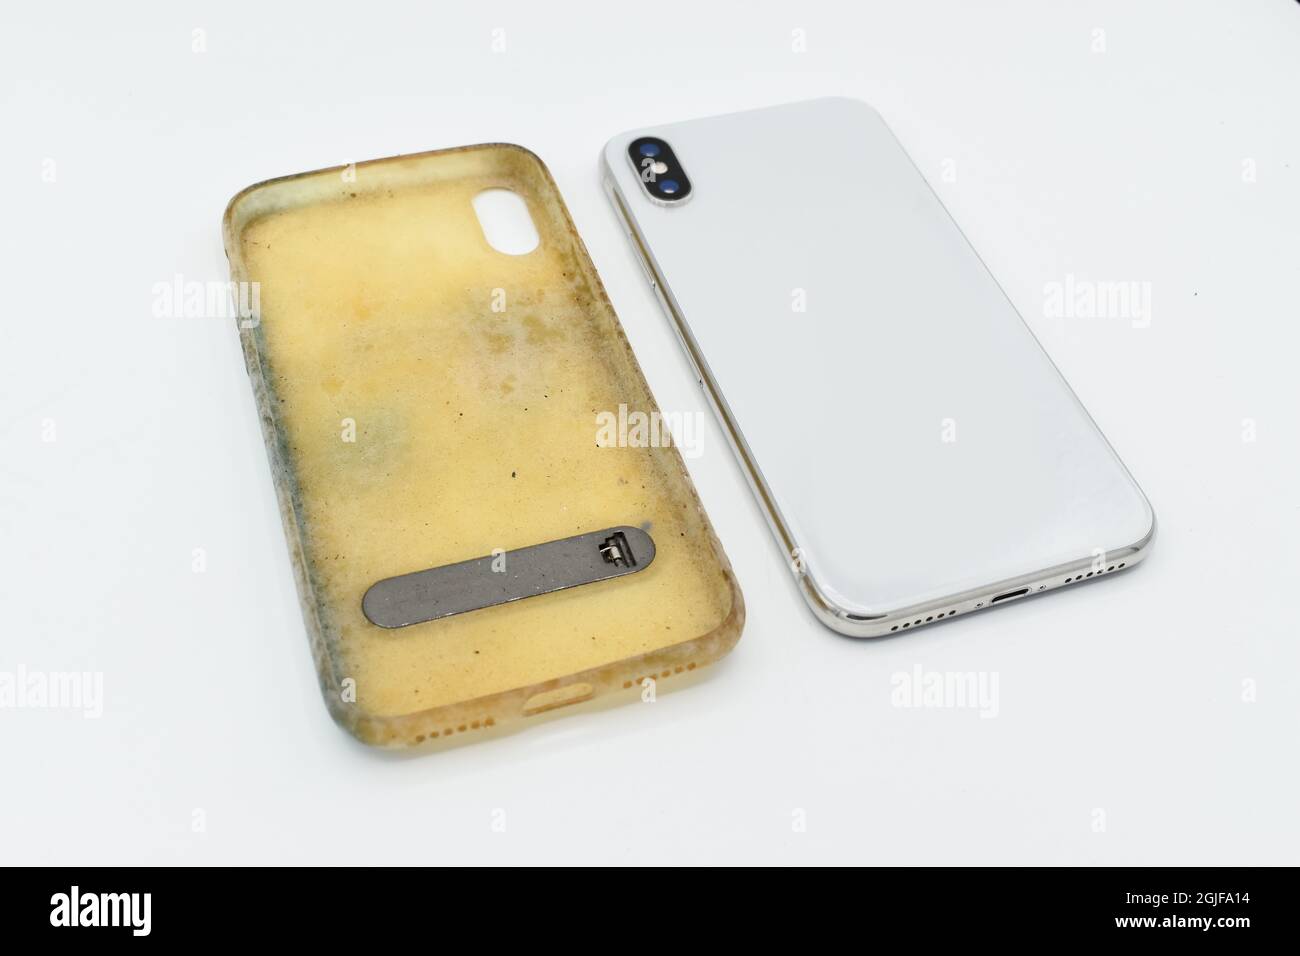 New smartphone, and old and dirty silicon phone case due to yellow stains and mold. Isolated on white background. Lateral view. Stock Photo